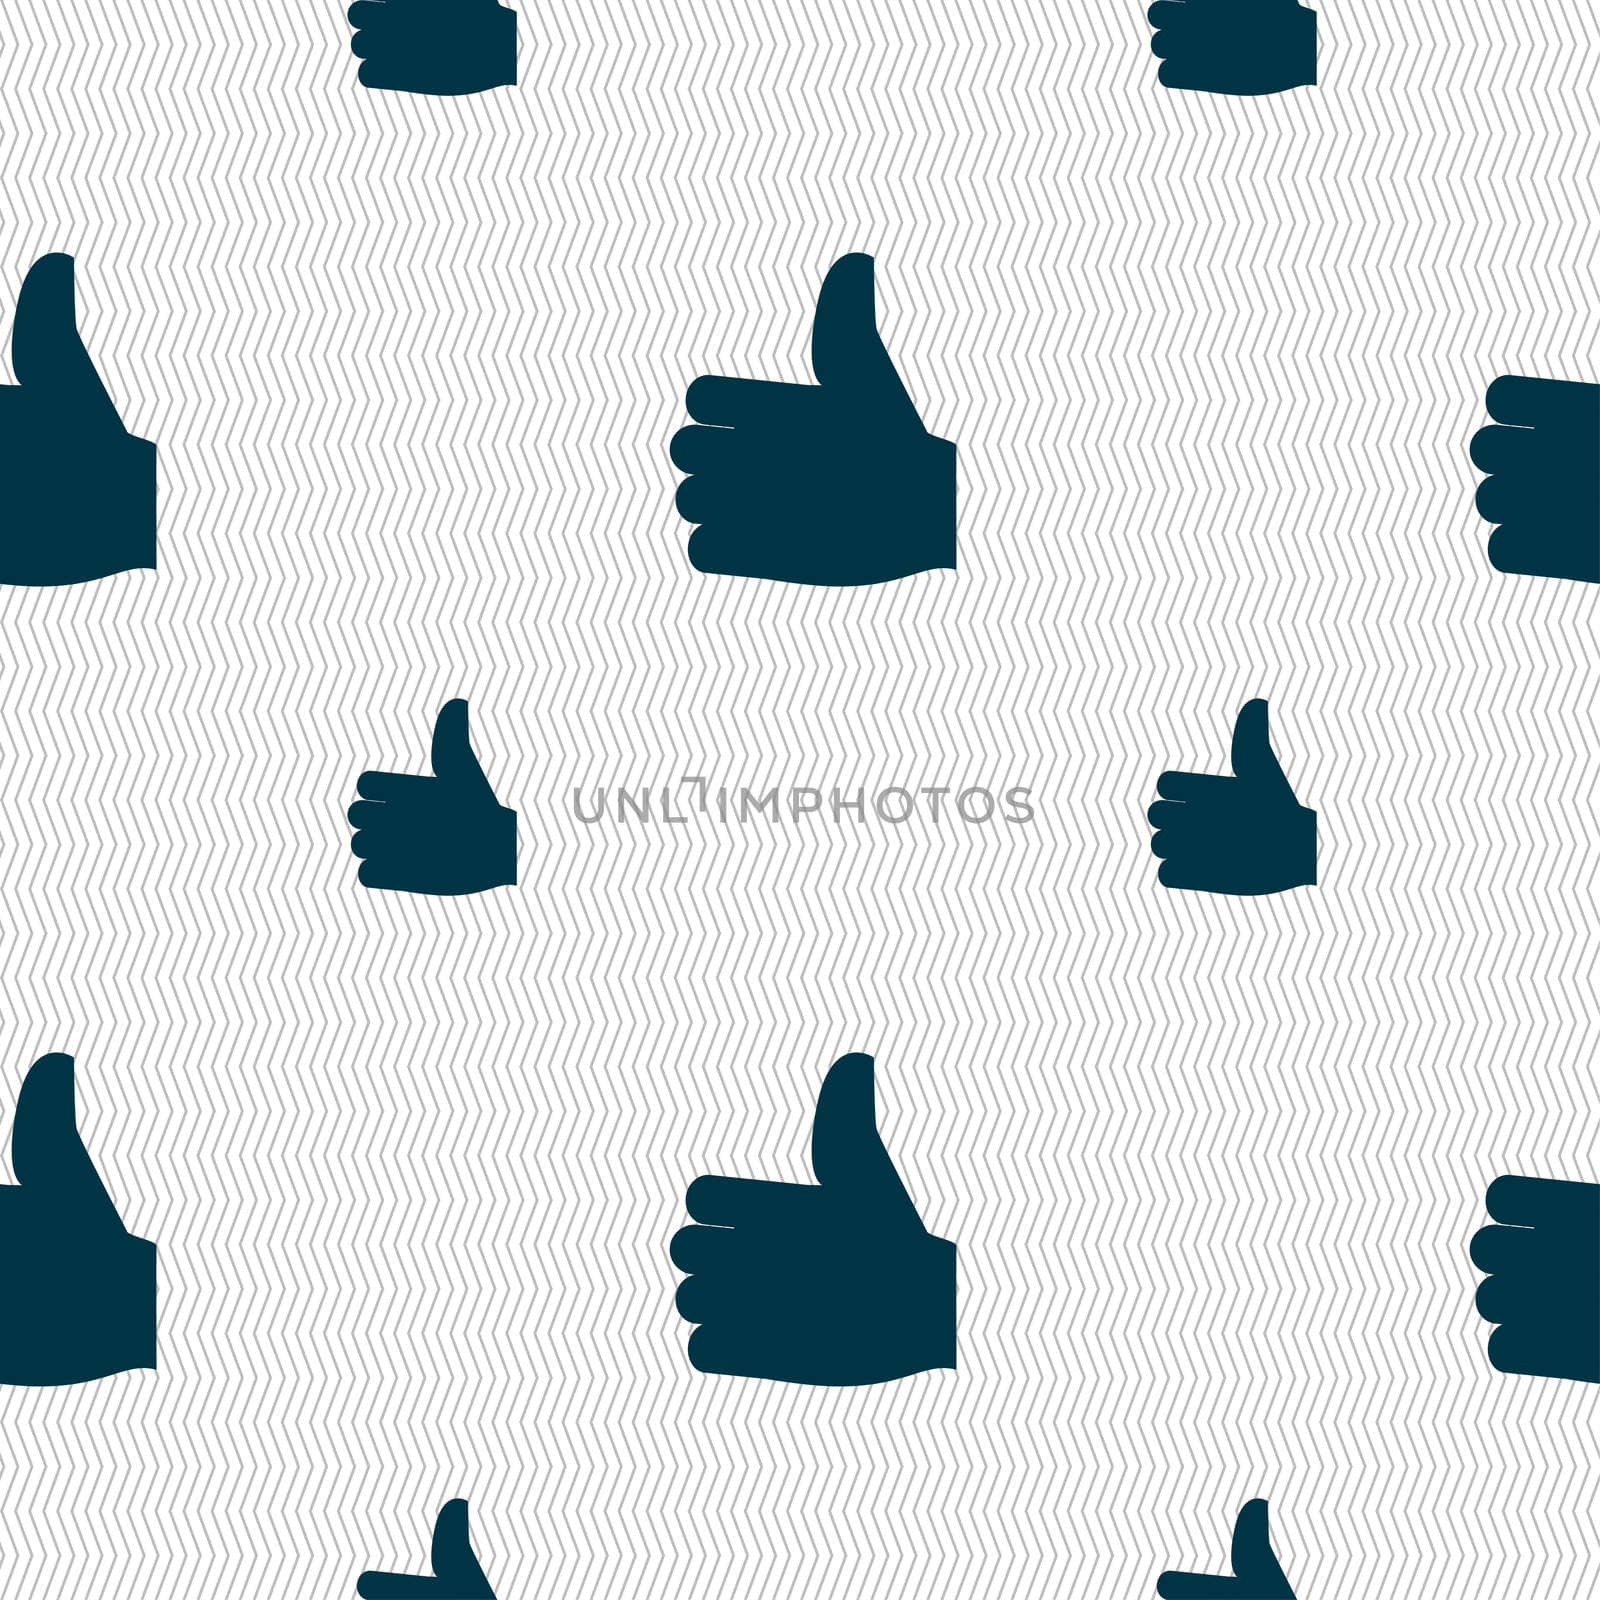 Like, Thumb up icon sign. Seamless pattern with geometric texture. illustration